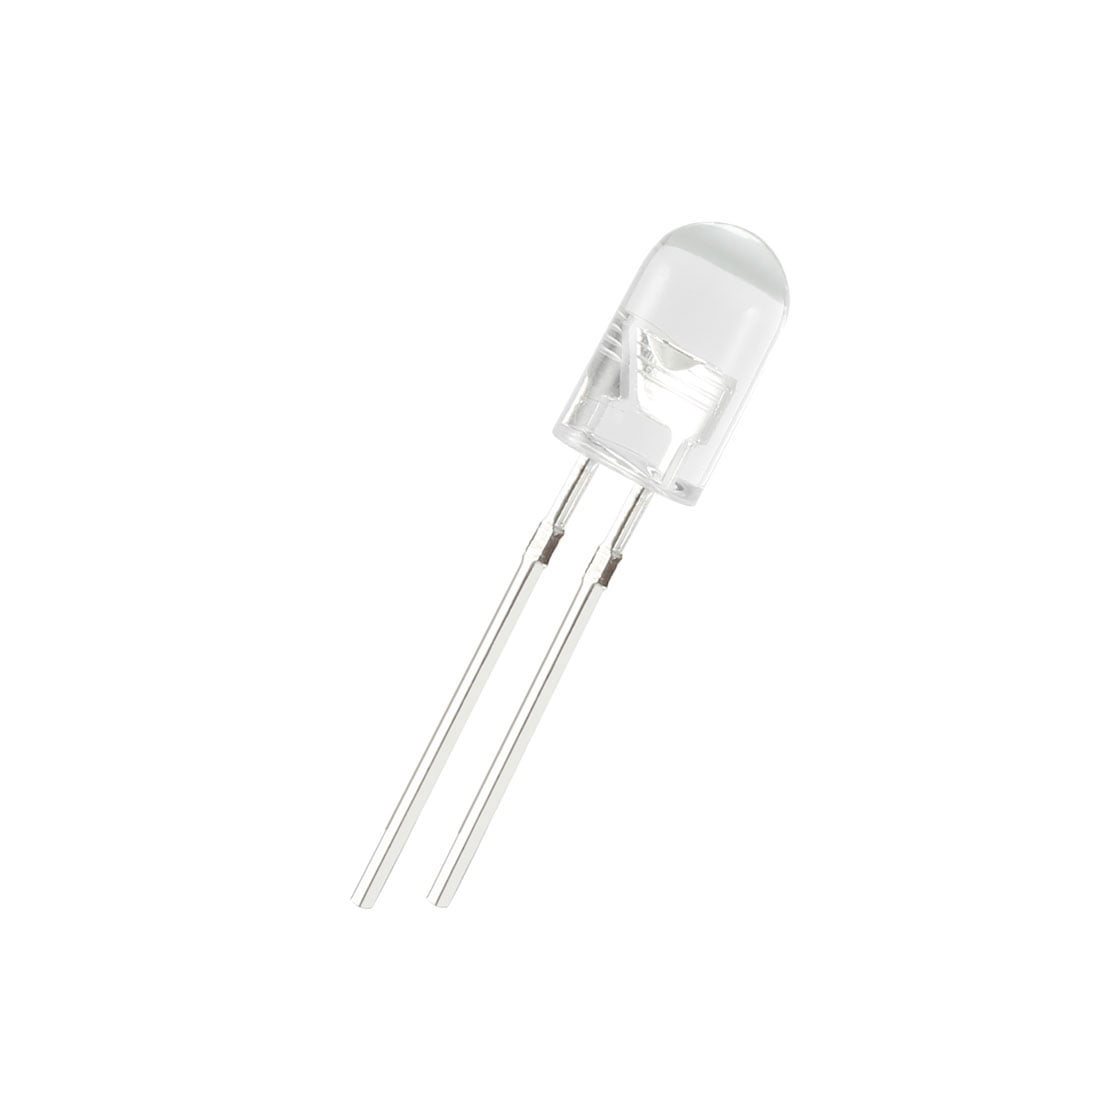 20mA Diffused 5mm Blue Ultra Bright LED Diode 3.0 to 3.2V 